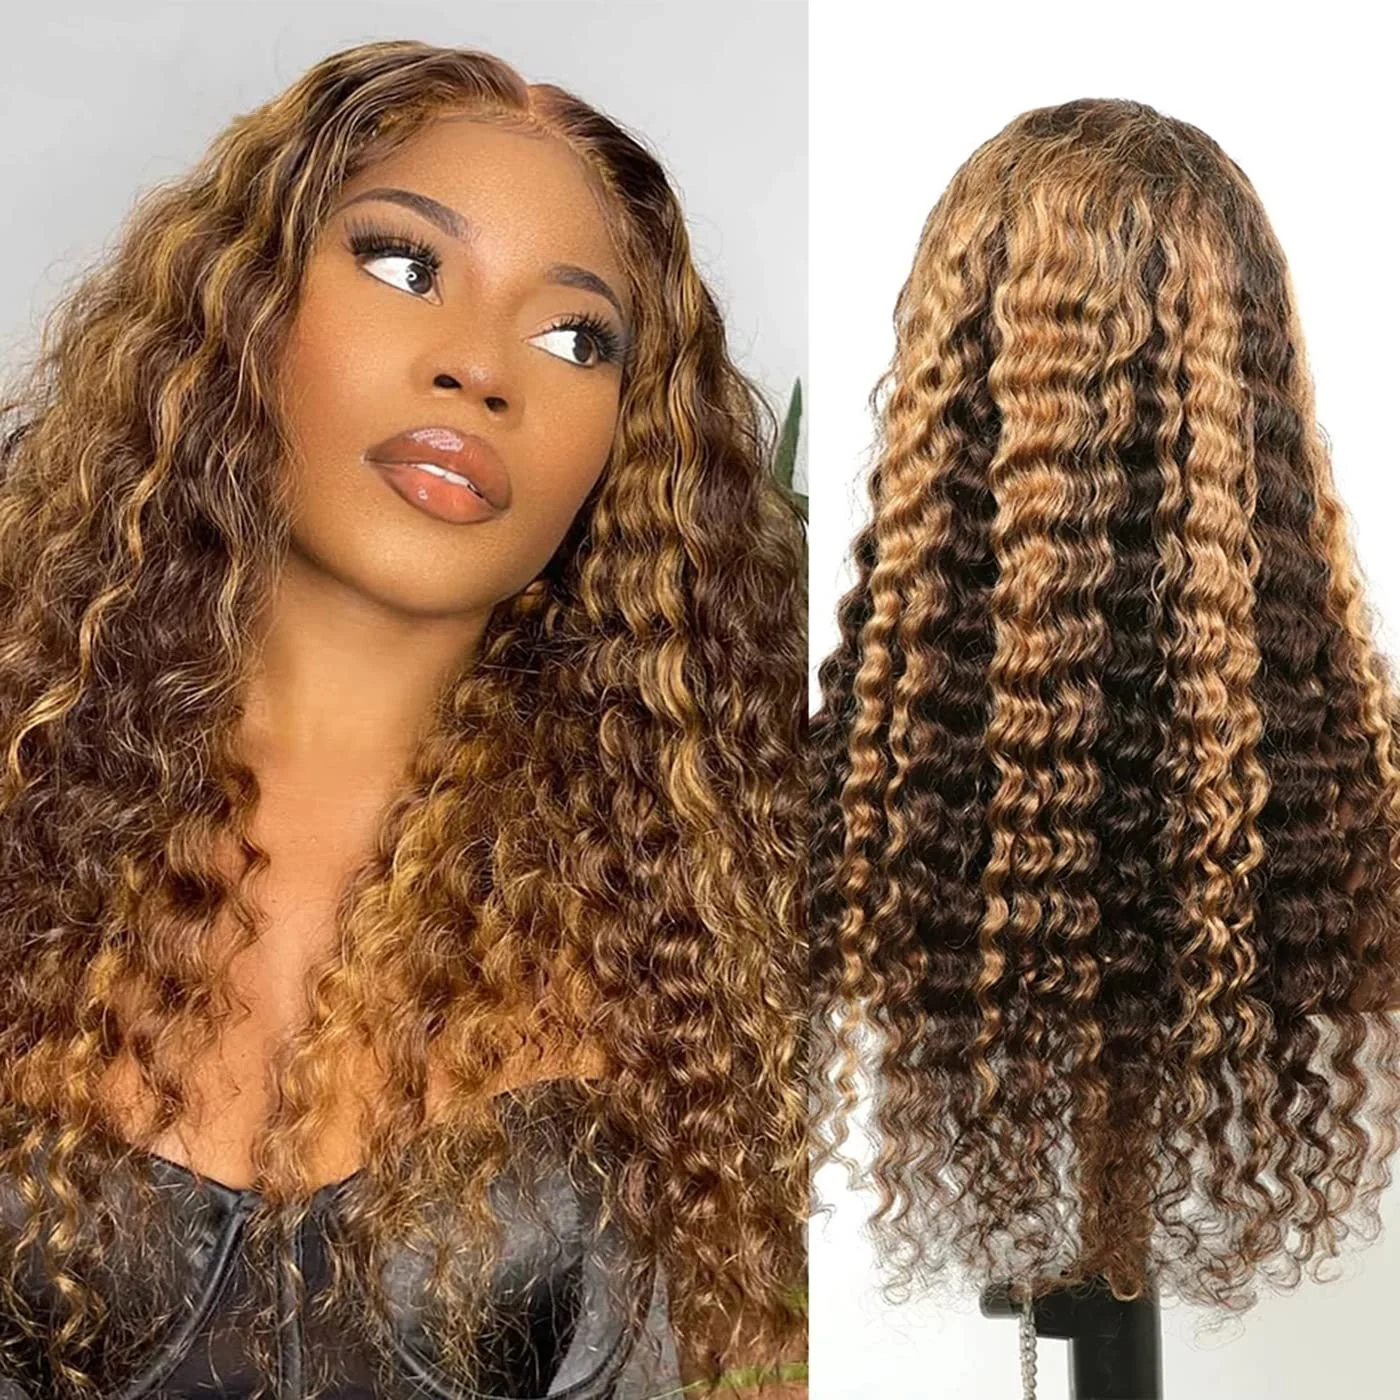 Honey Blonde Highlights Lace Front Wigs Human Hair Deep Wave Wigs Deep Curly 4x4 Lace Frontal Wigs for Black Women Pre Plucked